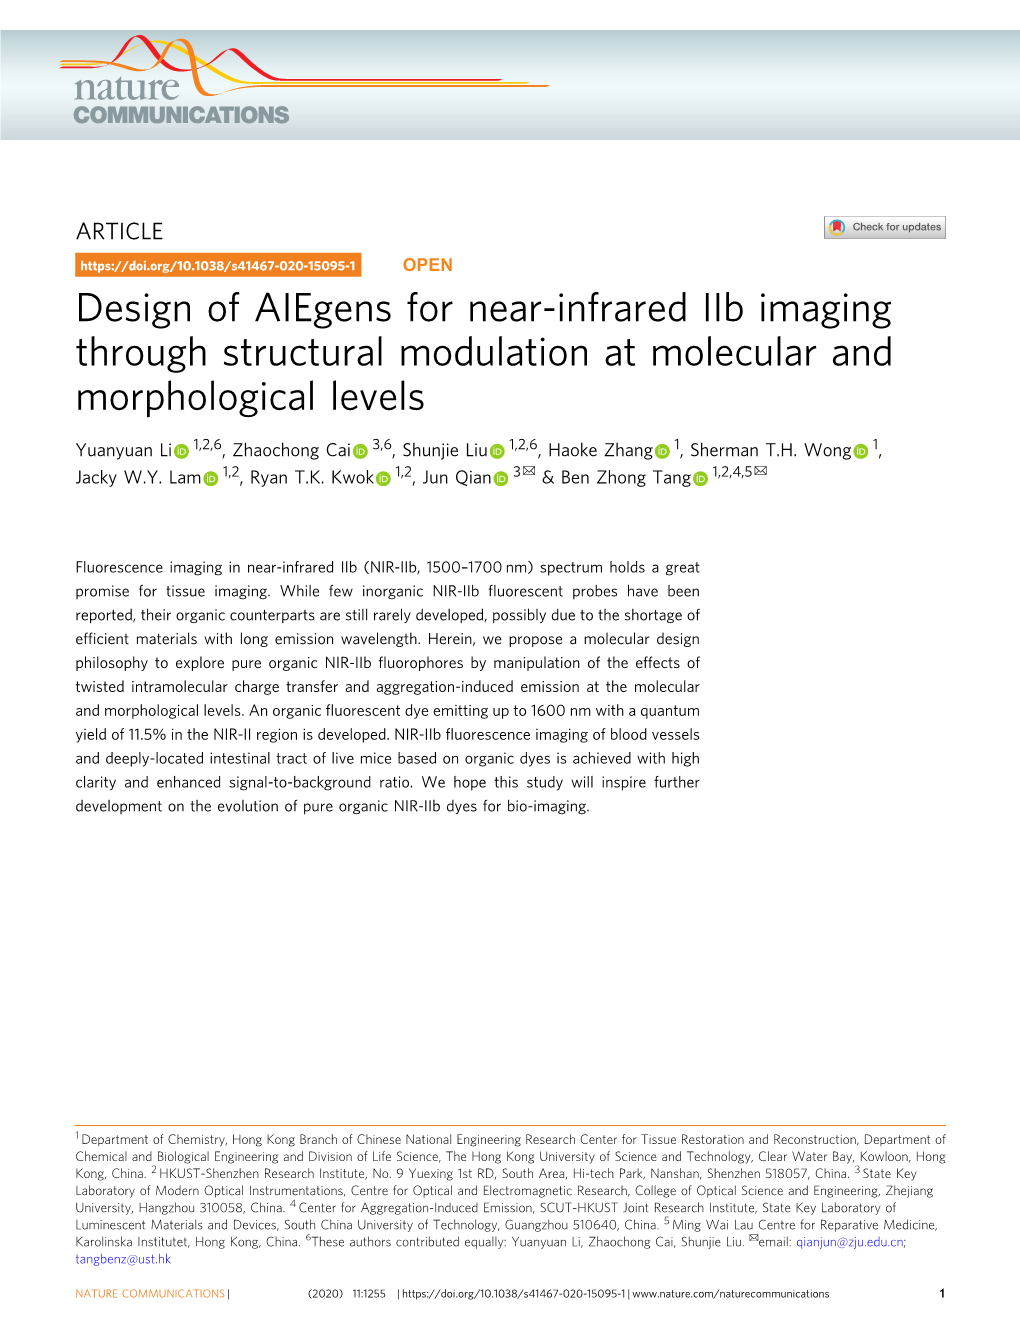 Design of Aiegens for Near-Infrared Iib Imaging Through Structural Modulation at Molecular and Morphological Levels